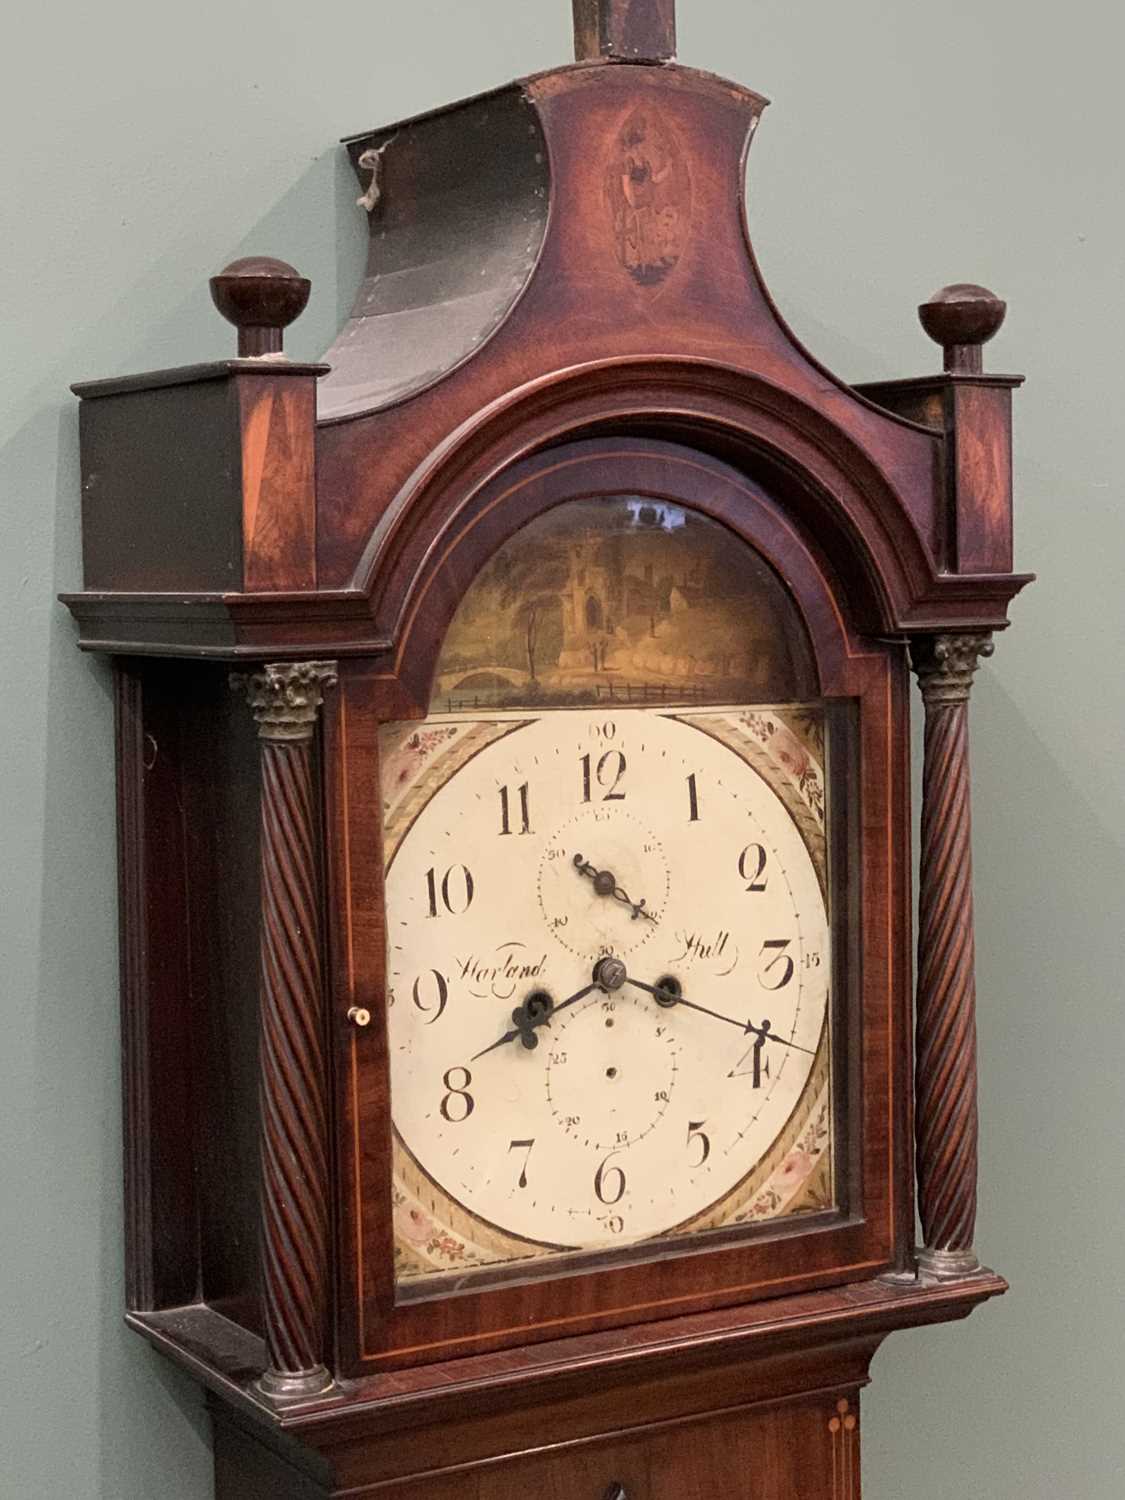 LONGCASE CLOCK - Victorian mahogany with painted dial - 'Harland of Hull', twin weights and pendulum - Image 3 of 10